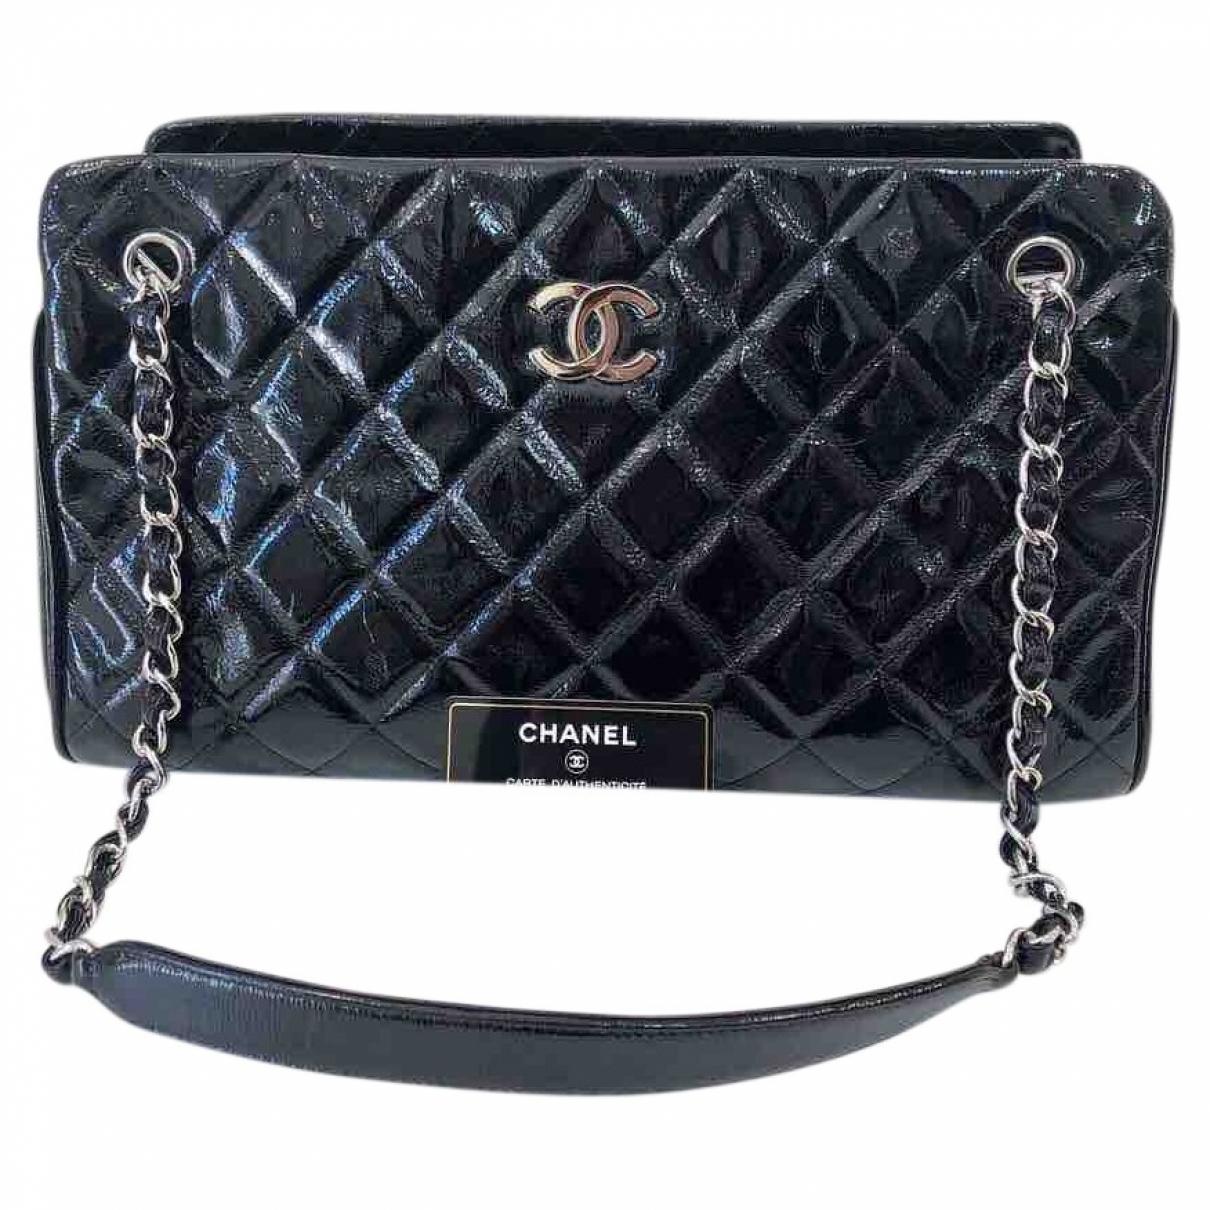 Lyst - Chanel Pre-owned Black Patent Leather Handbags in Black